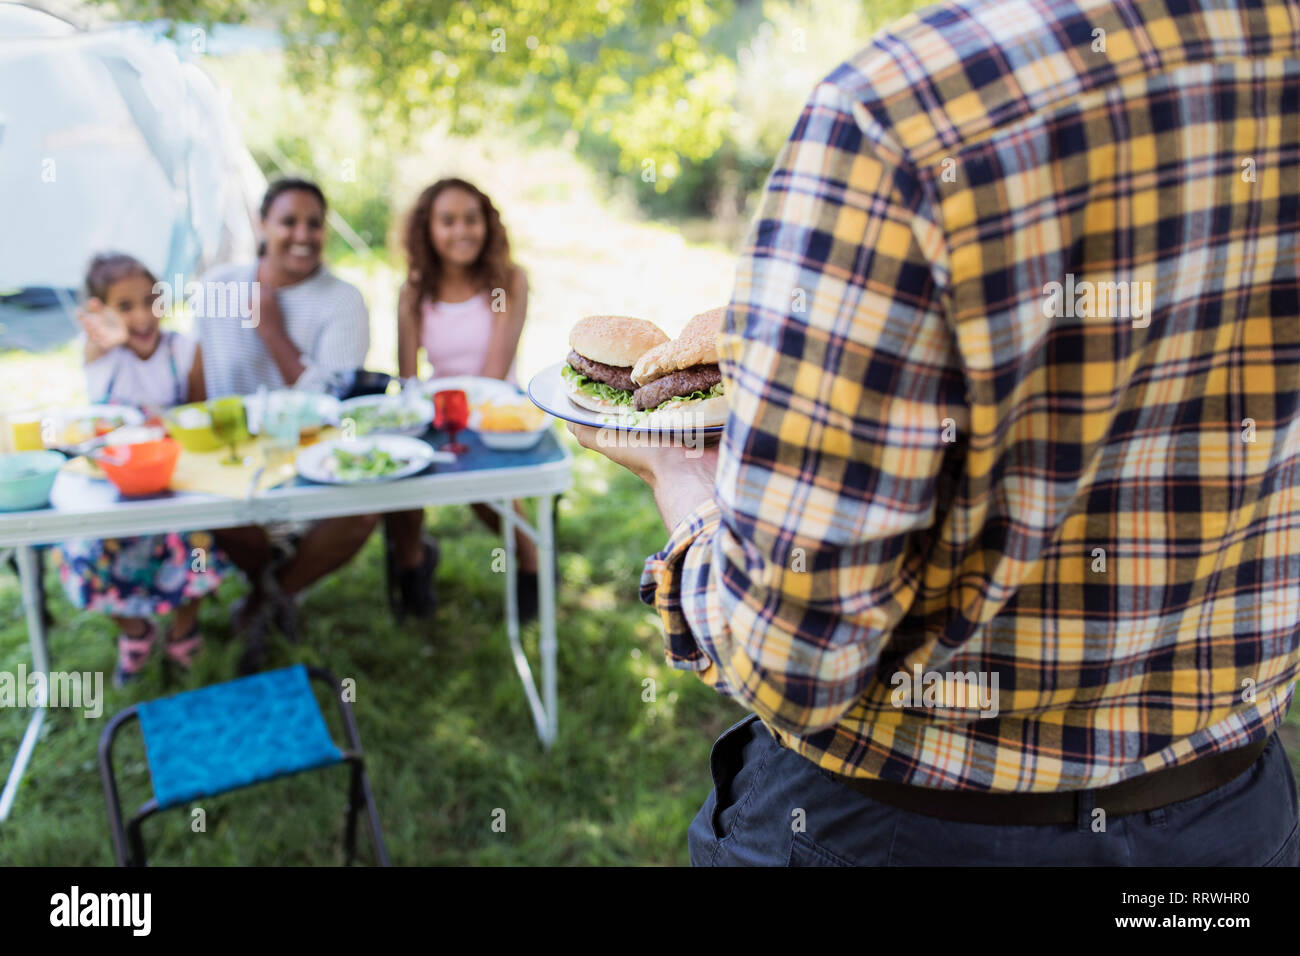 Father serving barbecue hamburgers to family at campsite table Stock Photo